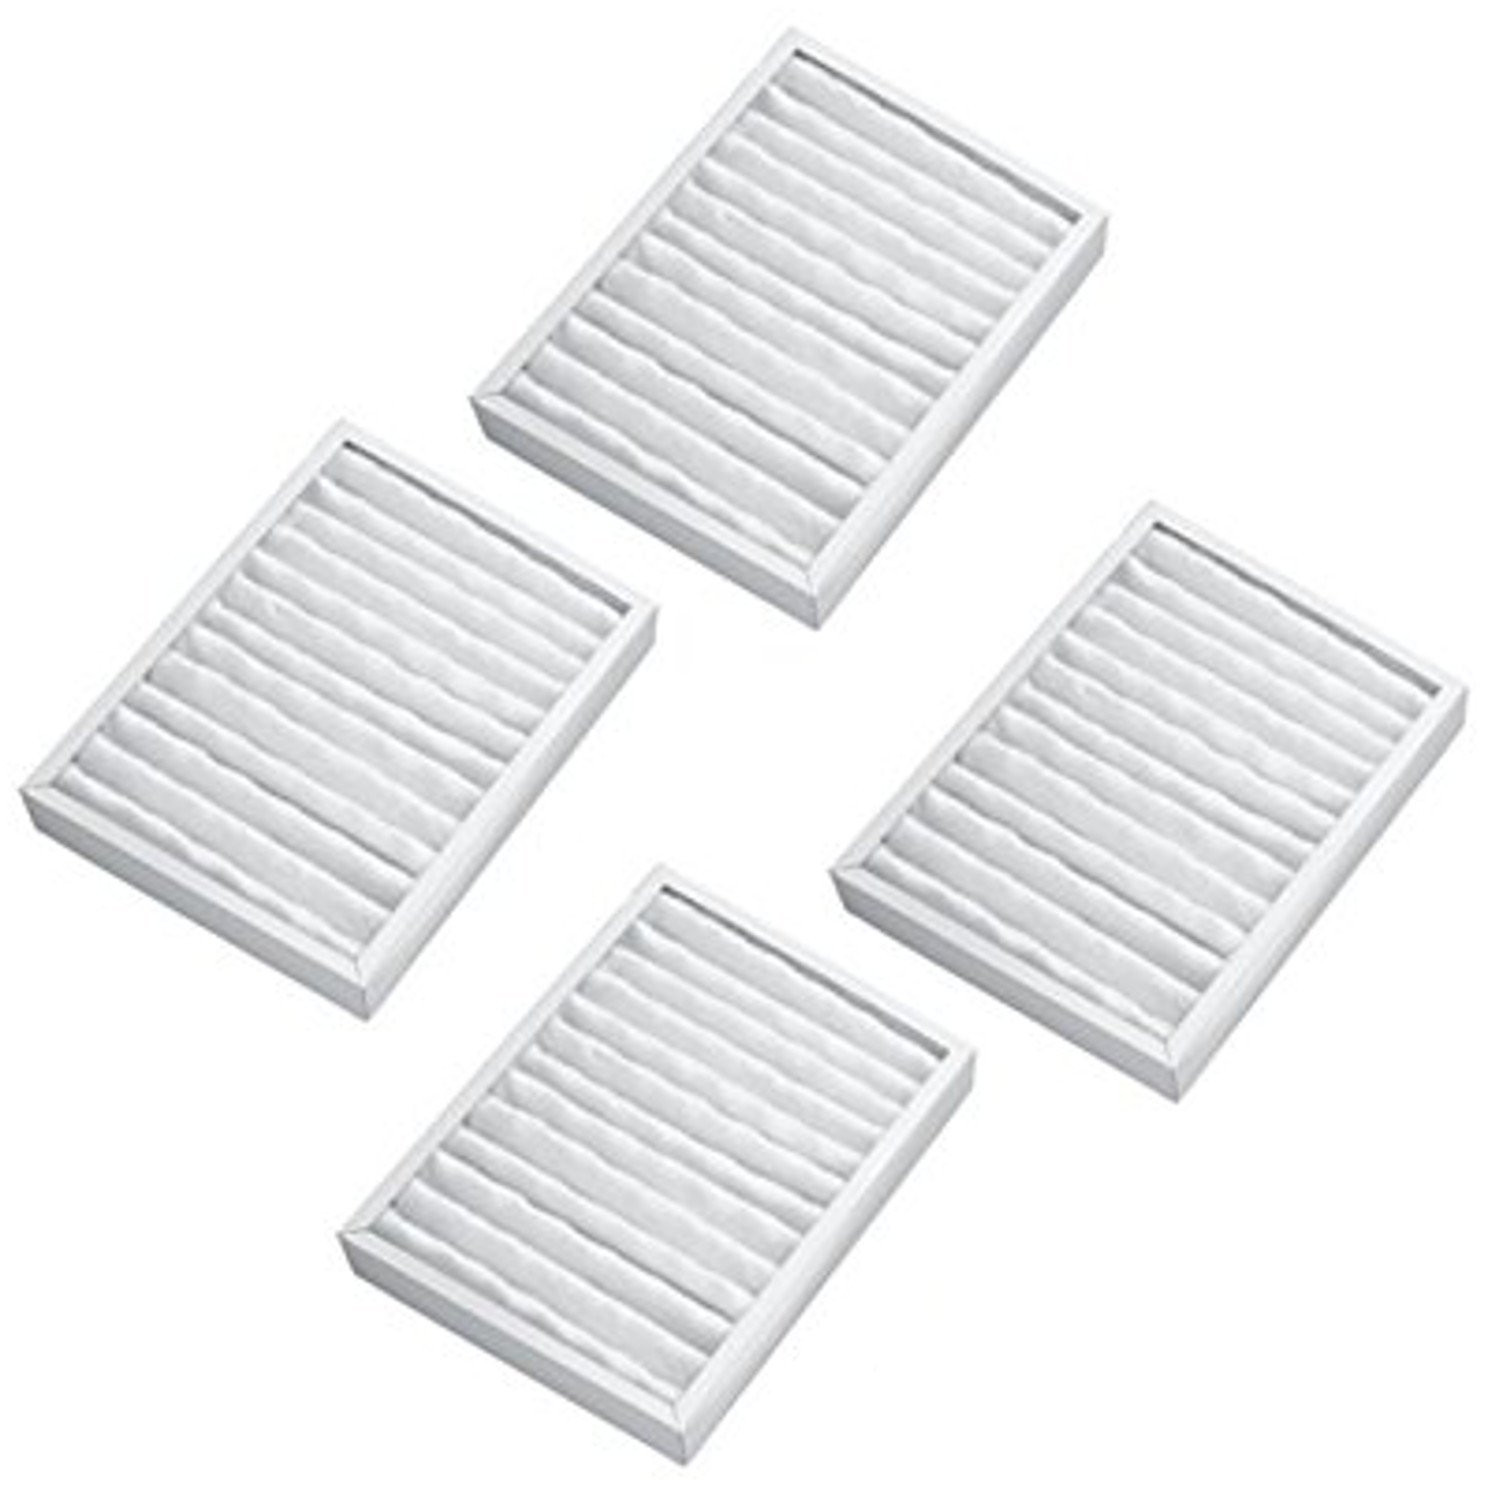 HQRP 4-pack Air Cleaner Filter for Hunter HEPAtech 30057, 30059, 30067, 30078, 30079, 30124 Air Purifiers 